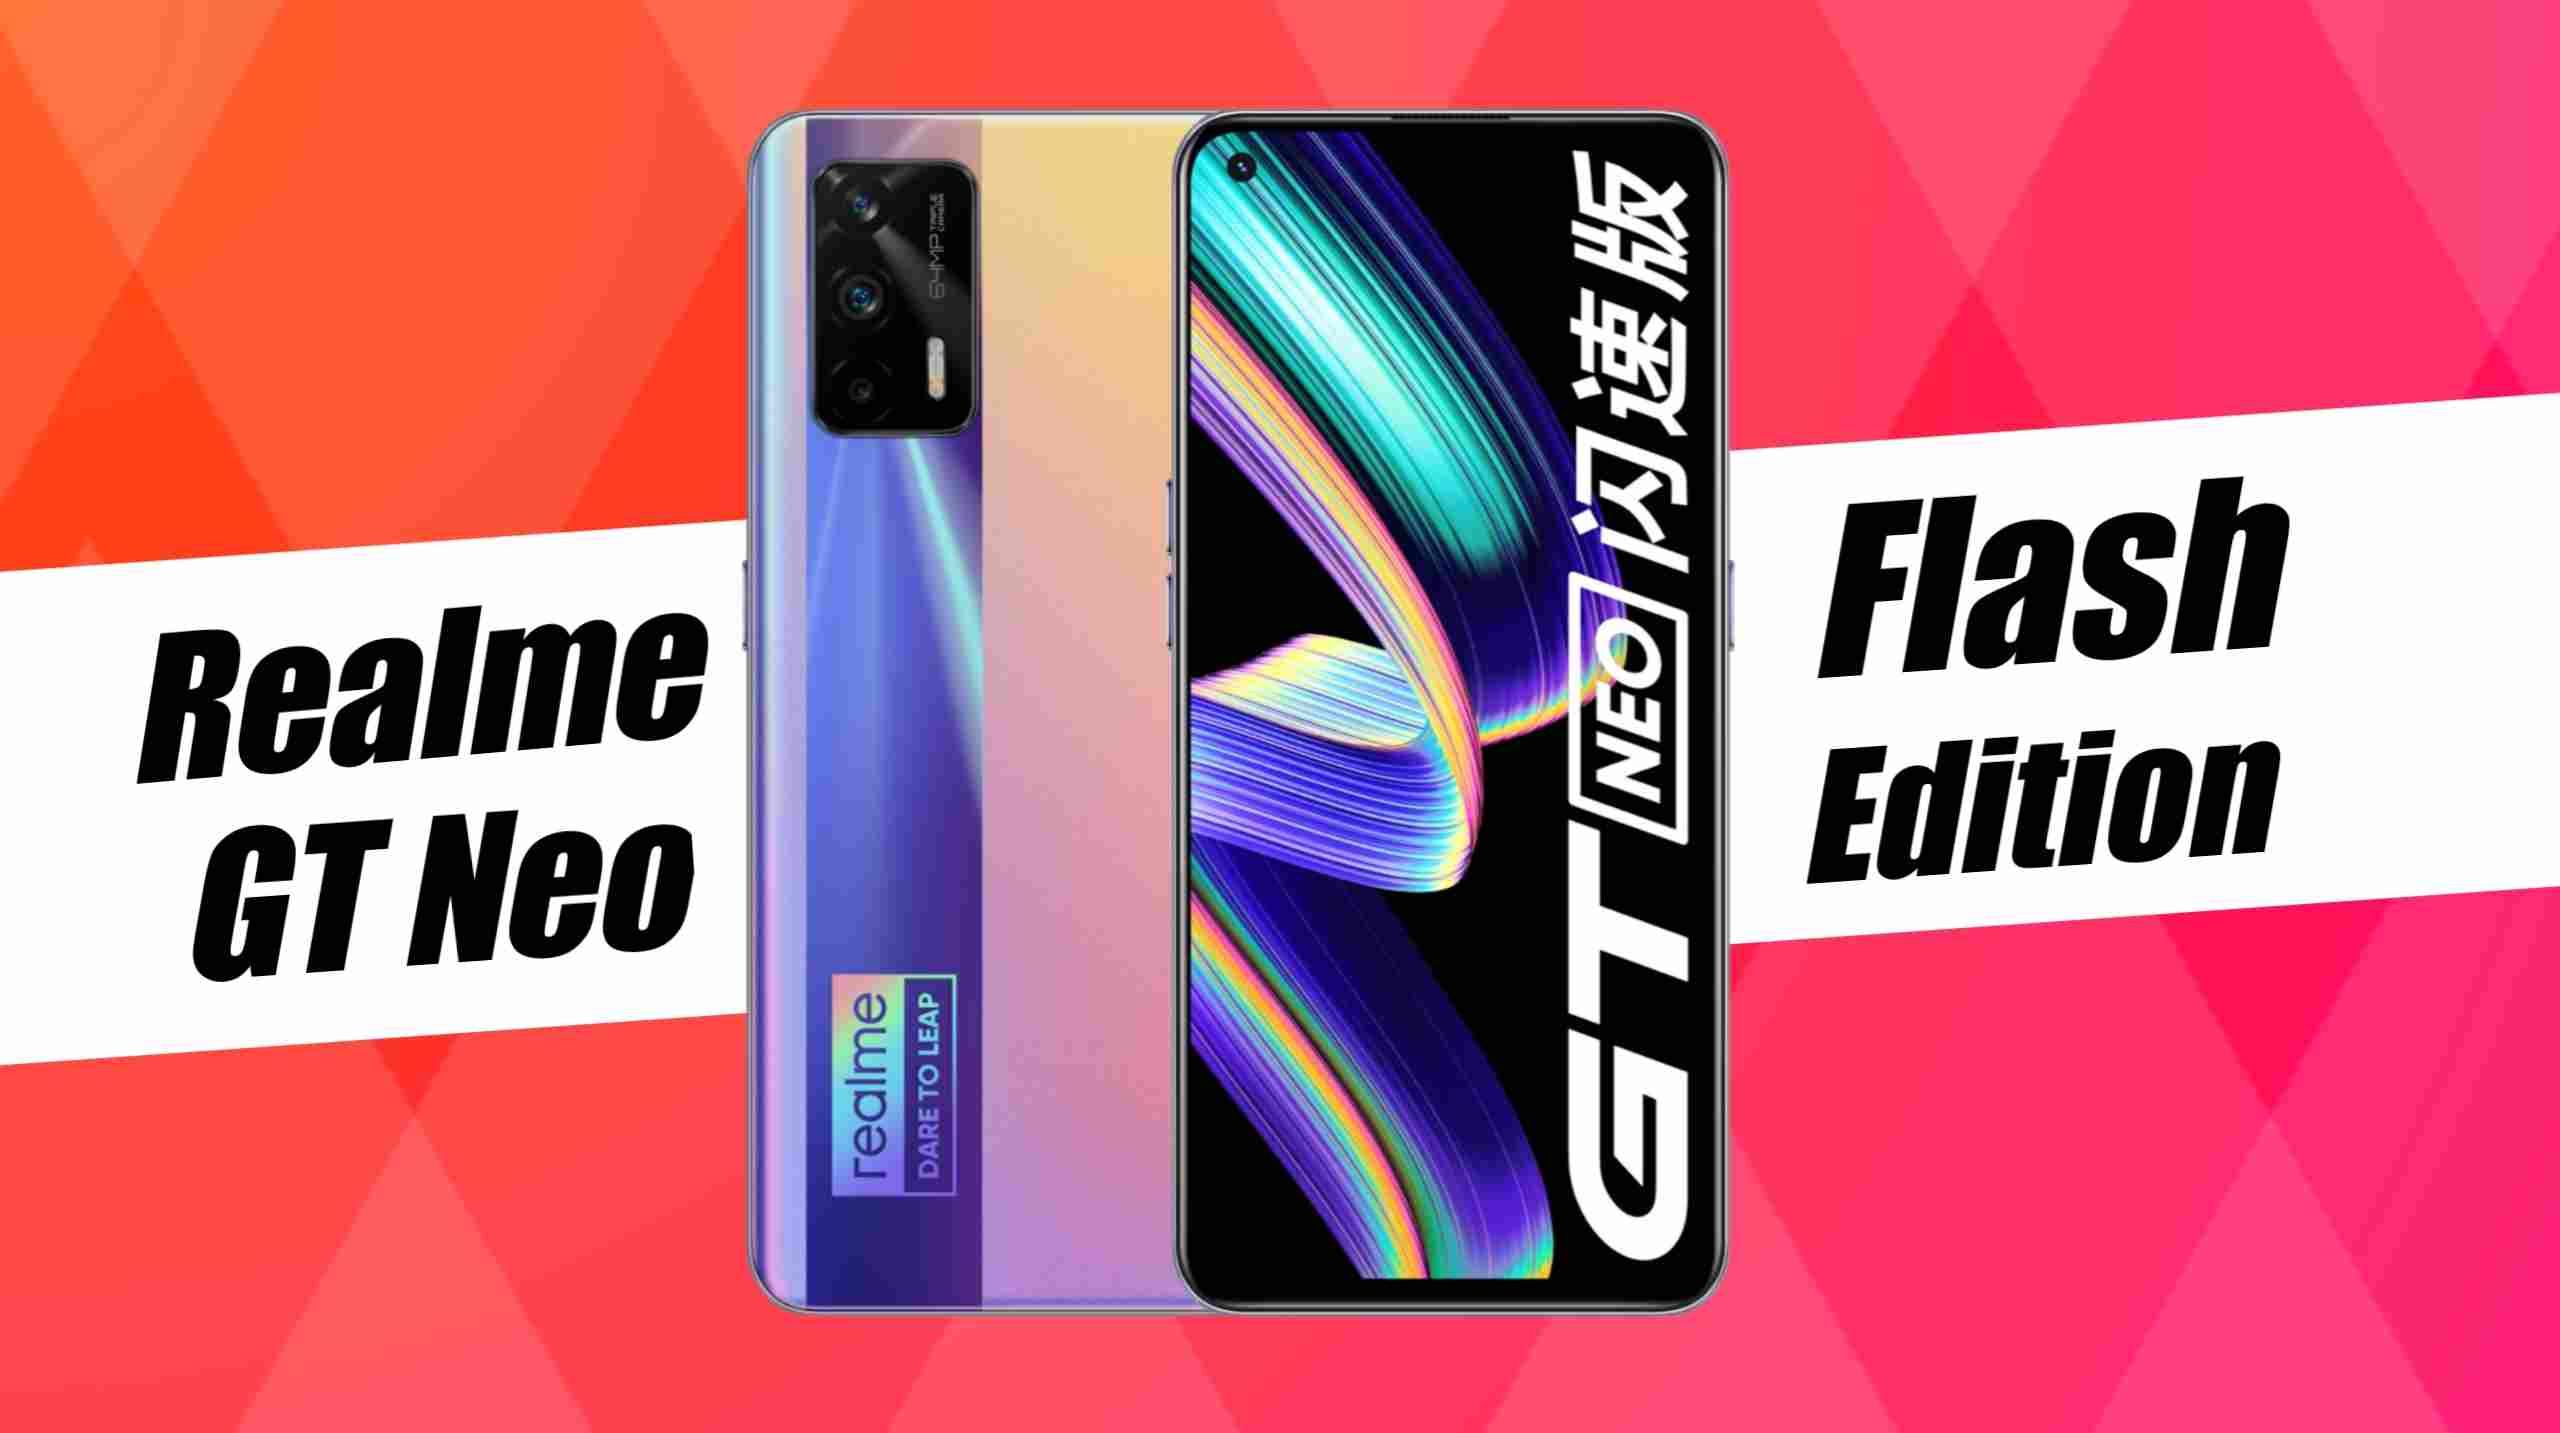 Realme GT Neo Flash Edition with MediaTek Dimensity 1200 SoC launched: Price, Specifications